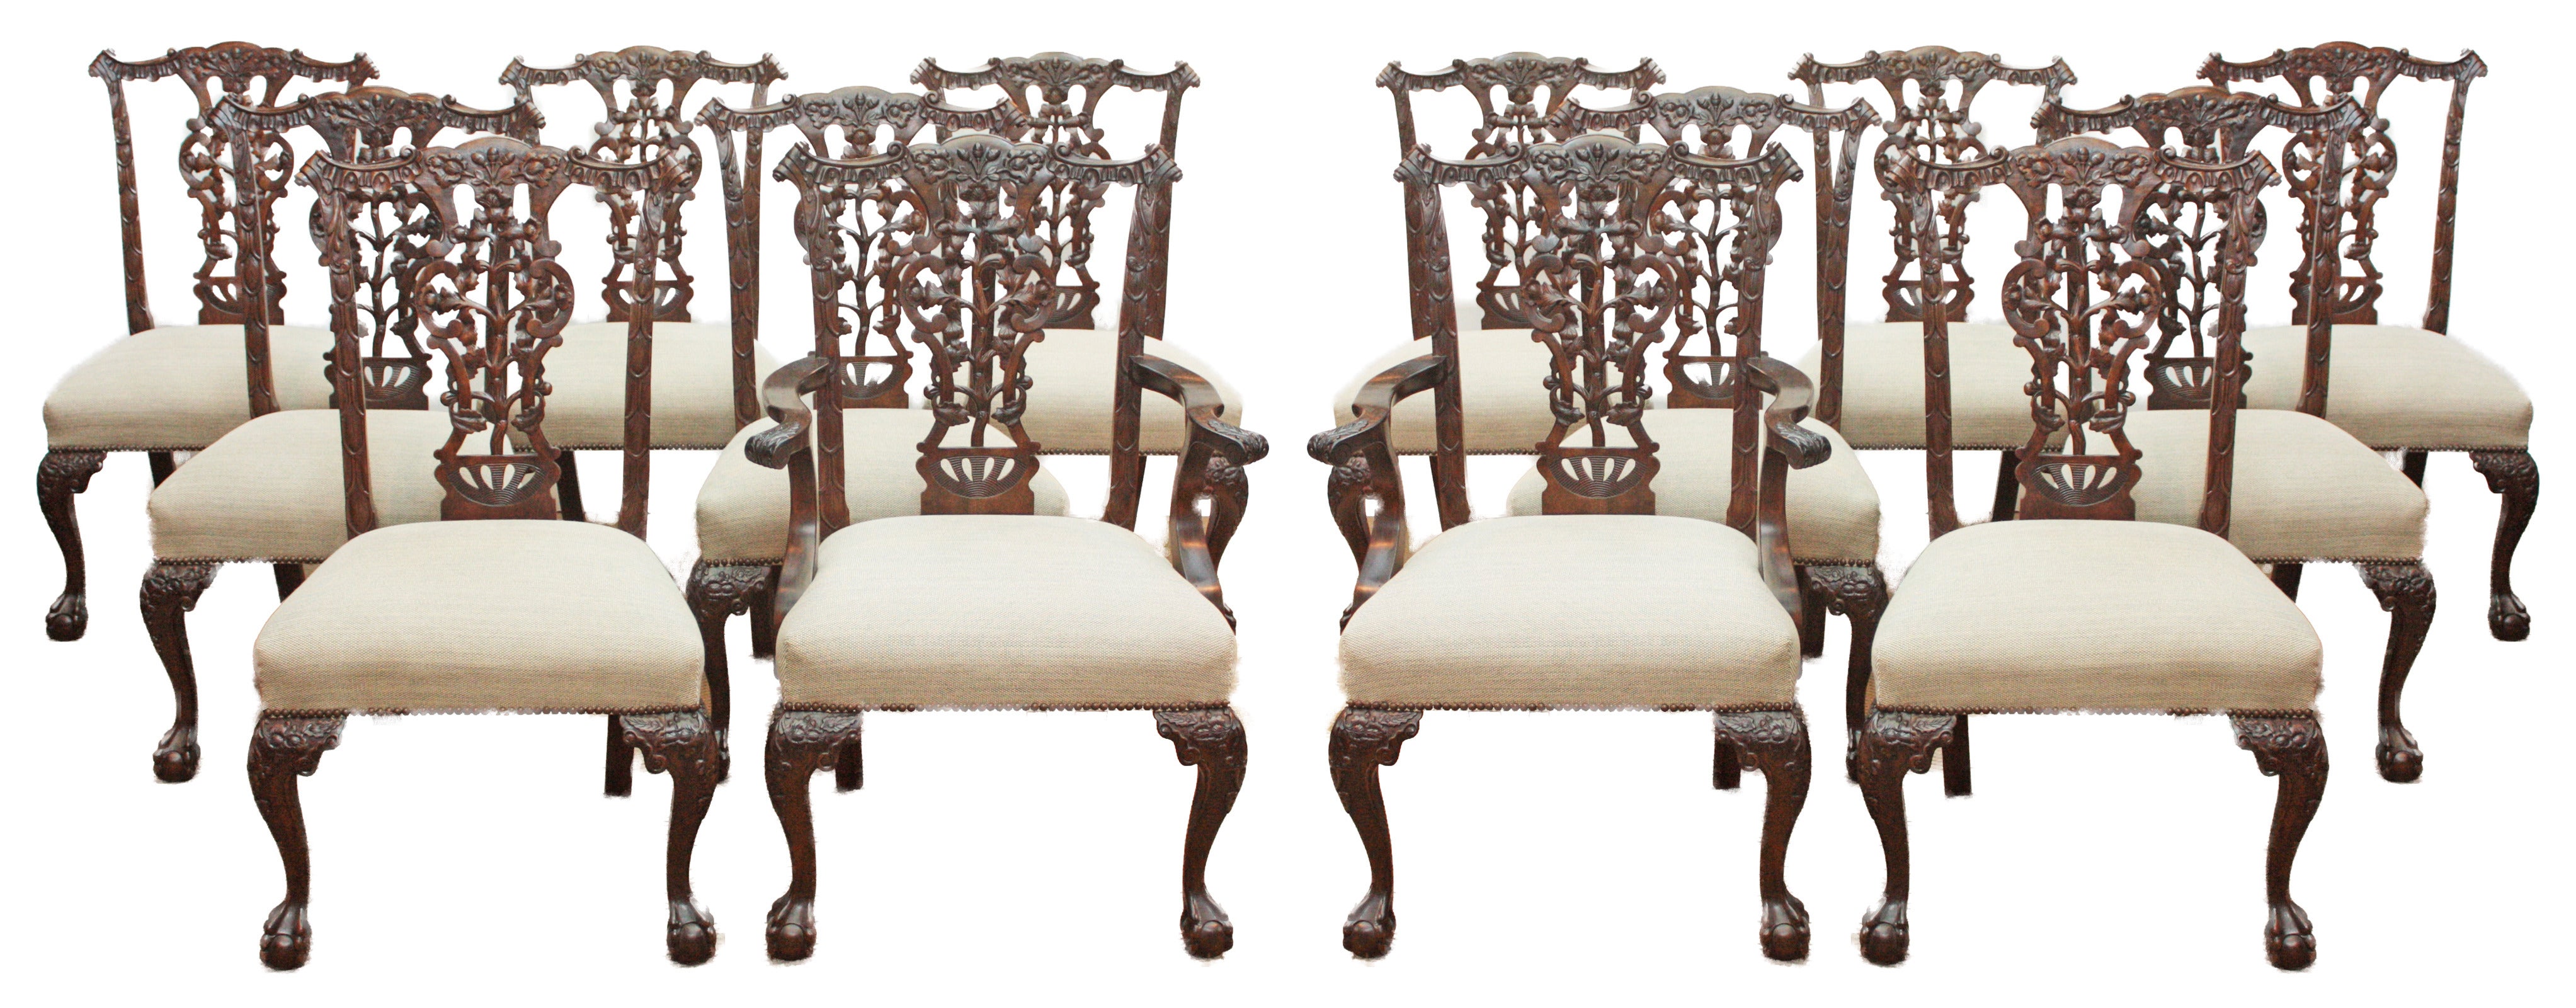 Set of 14 Chippendale Style Ribband-back Chairs